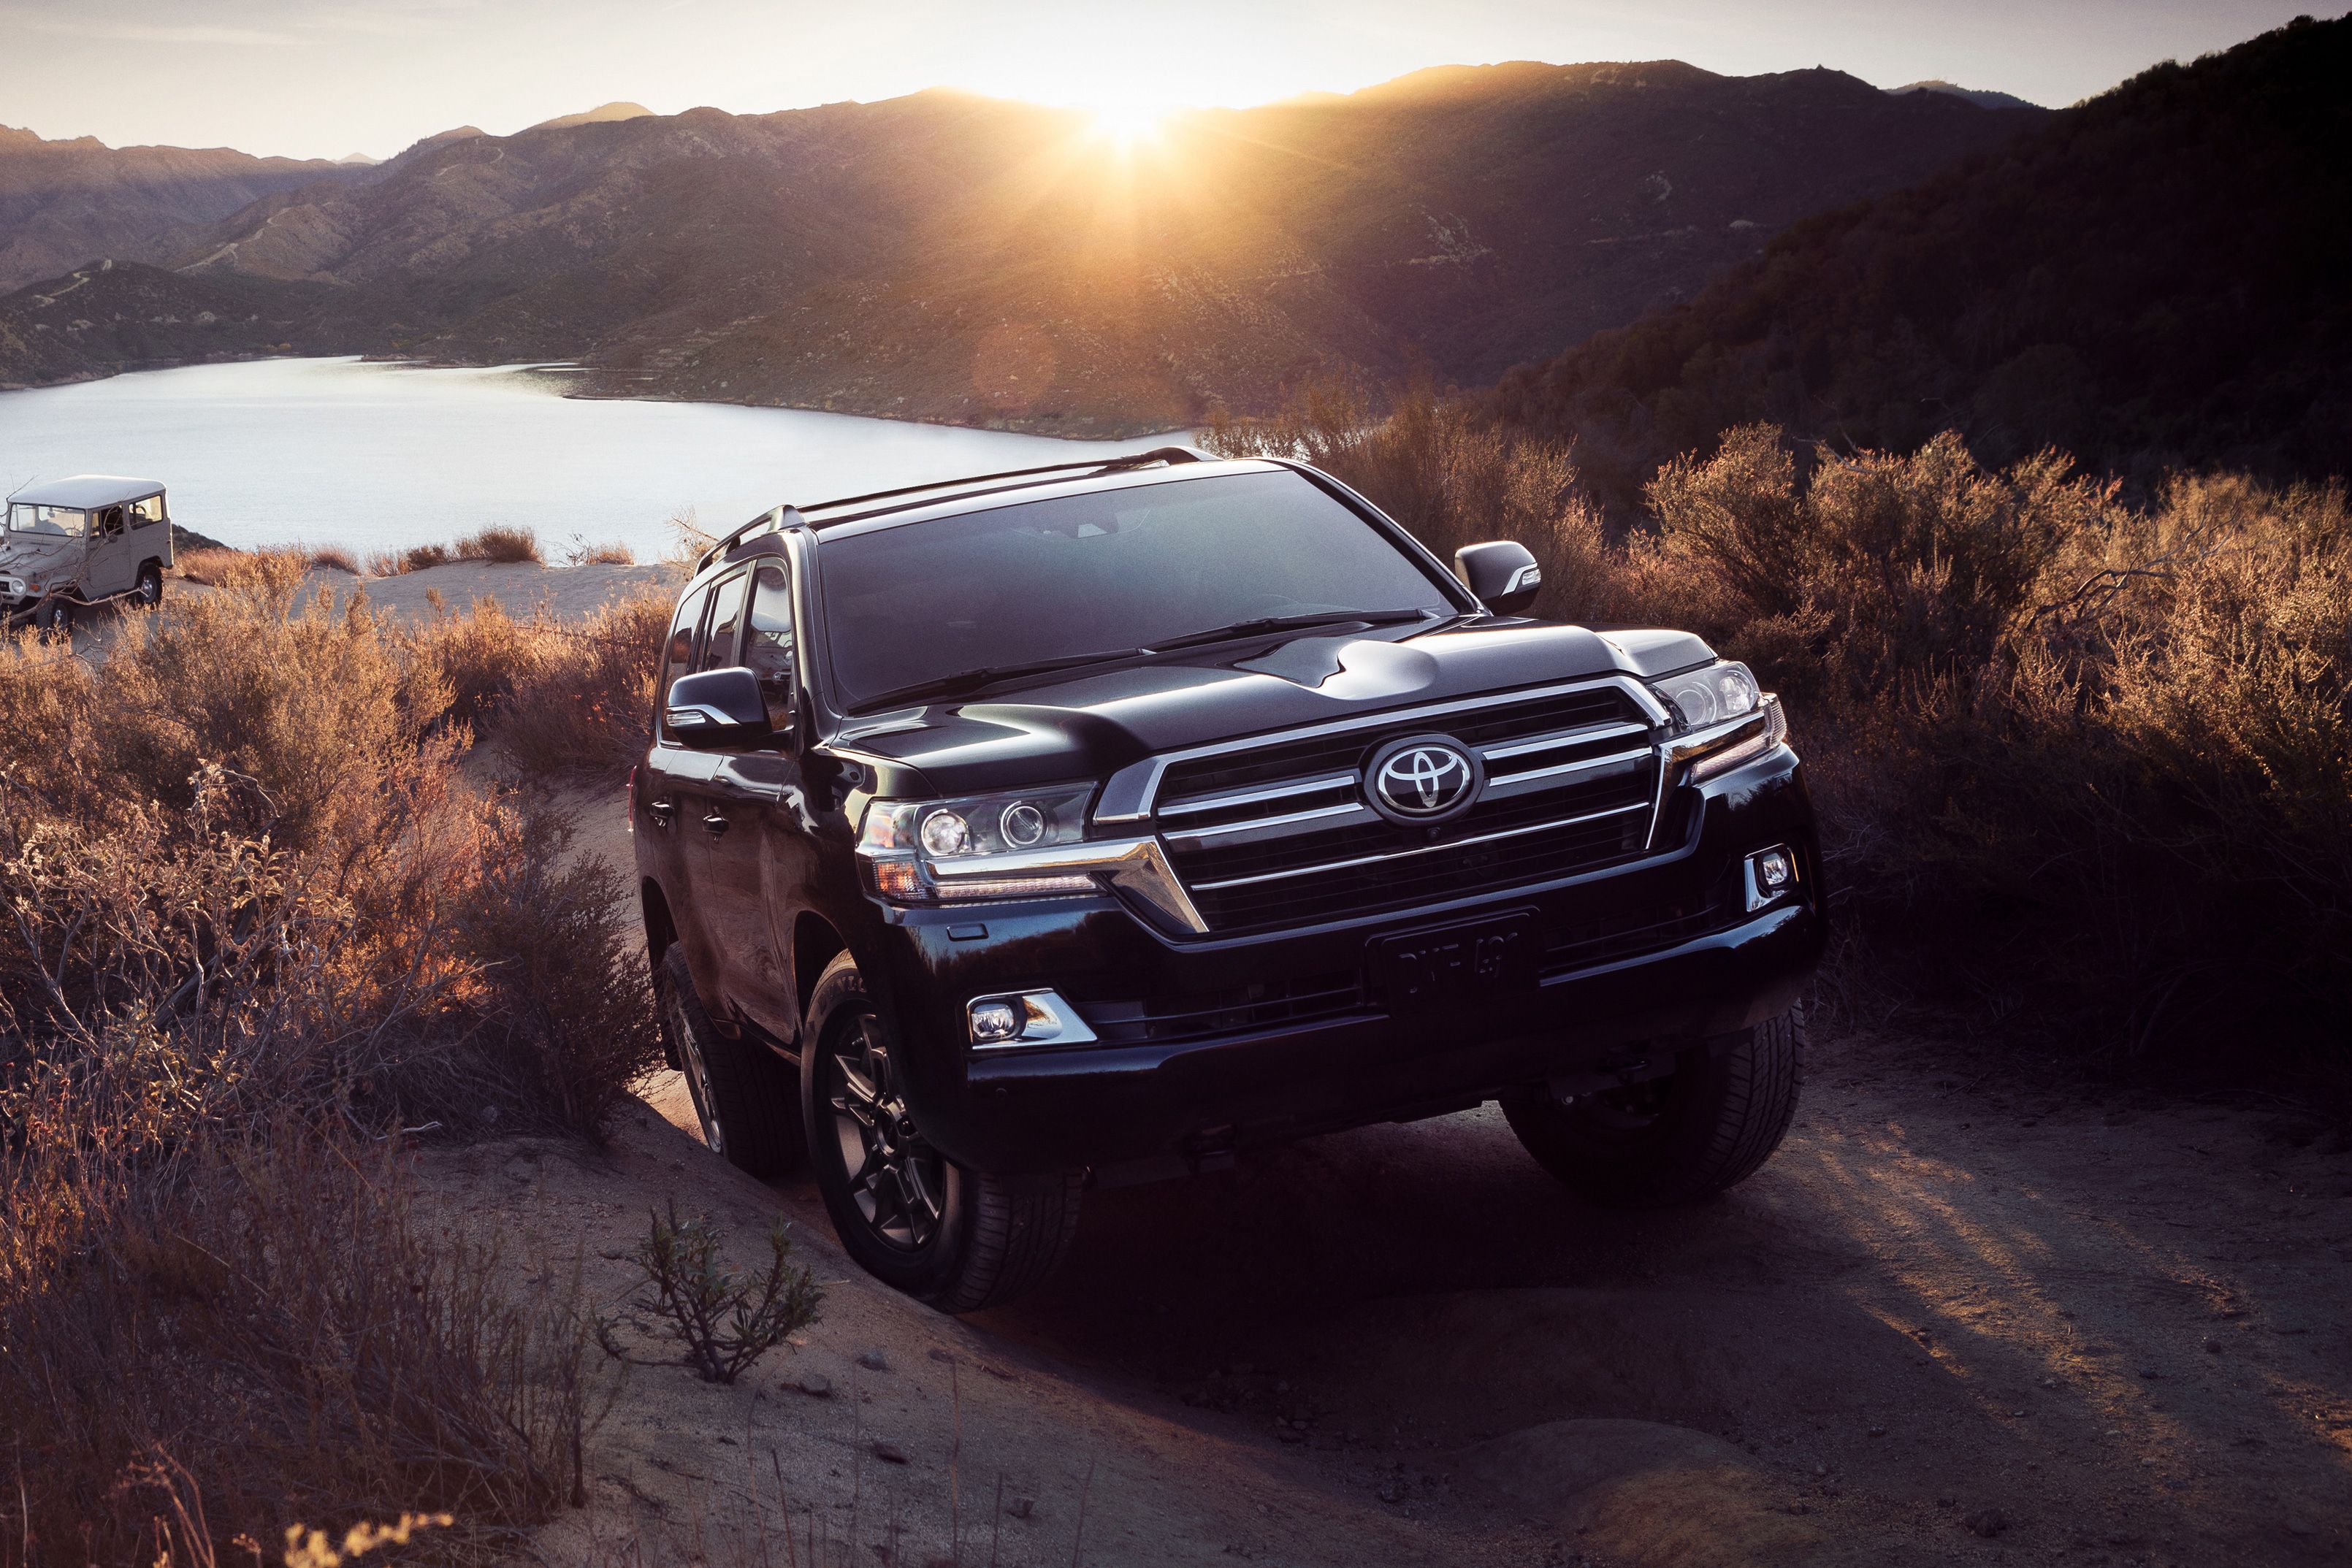 2021 Toyota Land Cruiser Review: Last Stand For The World's Best SUV